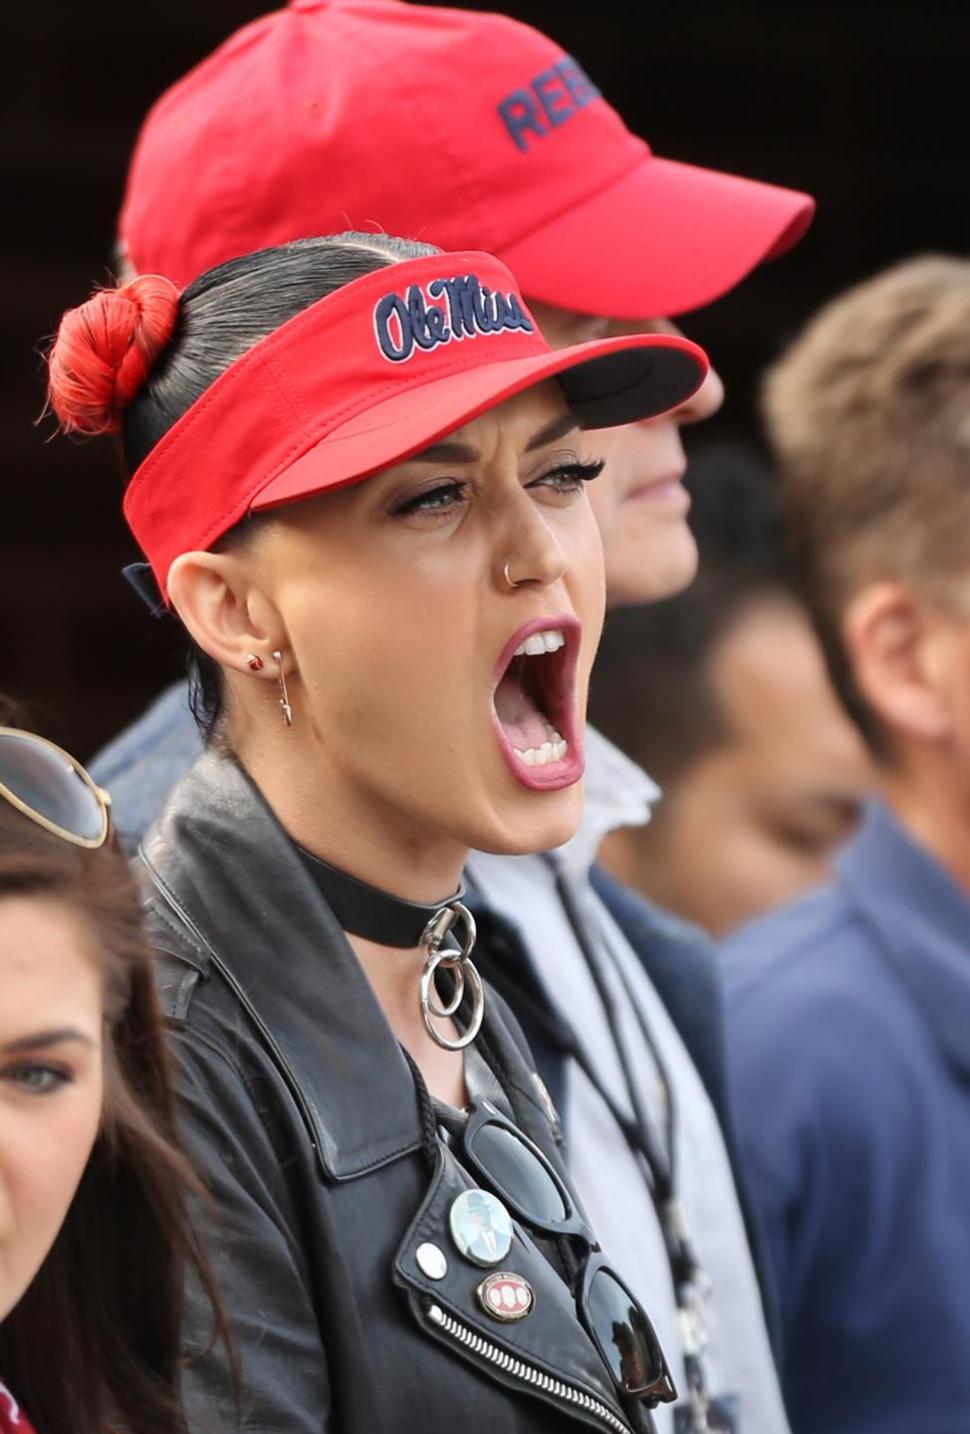 Katy Perry in the stands, rooting for Ole Miss.